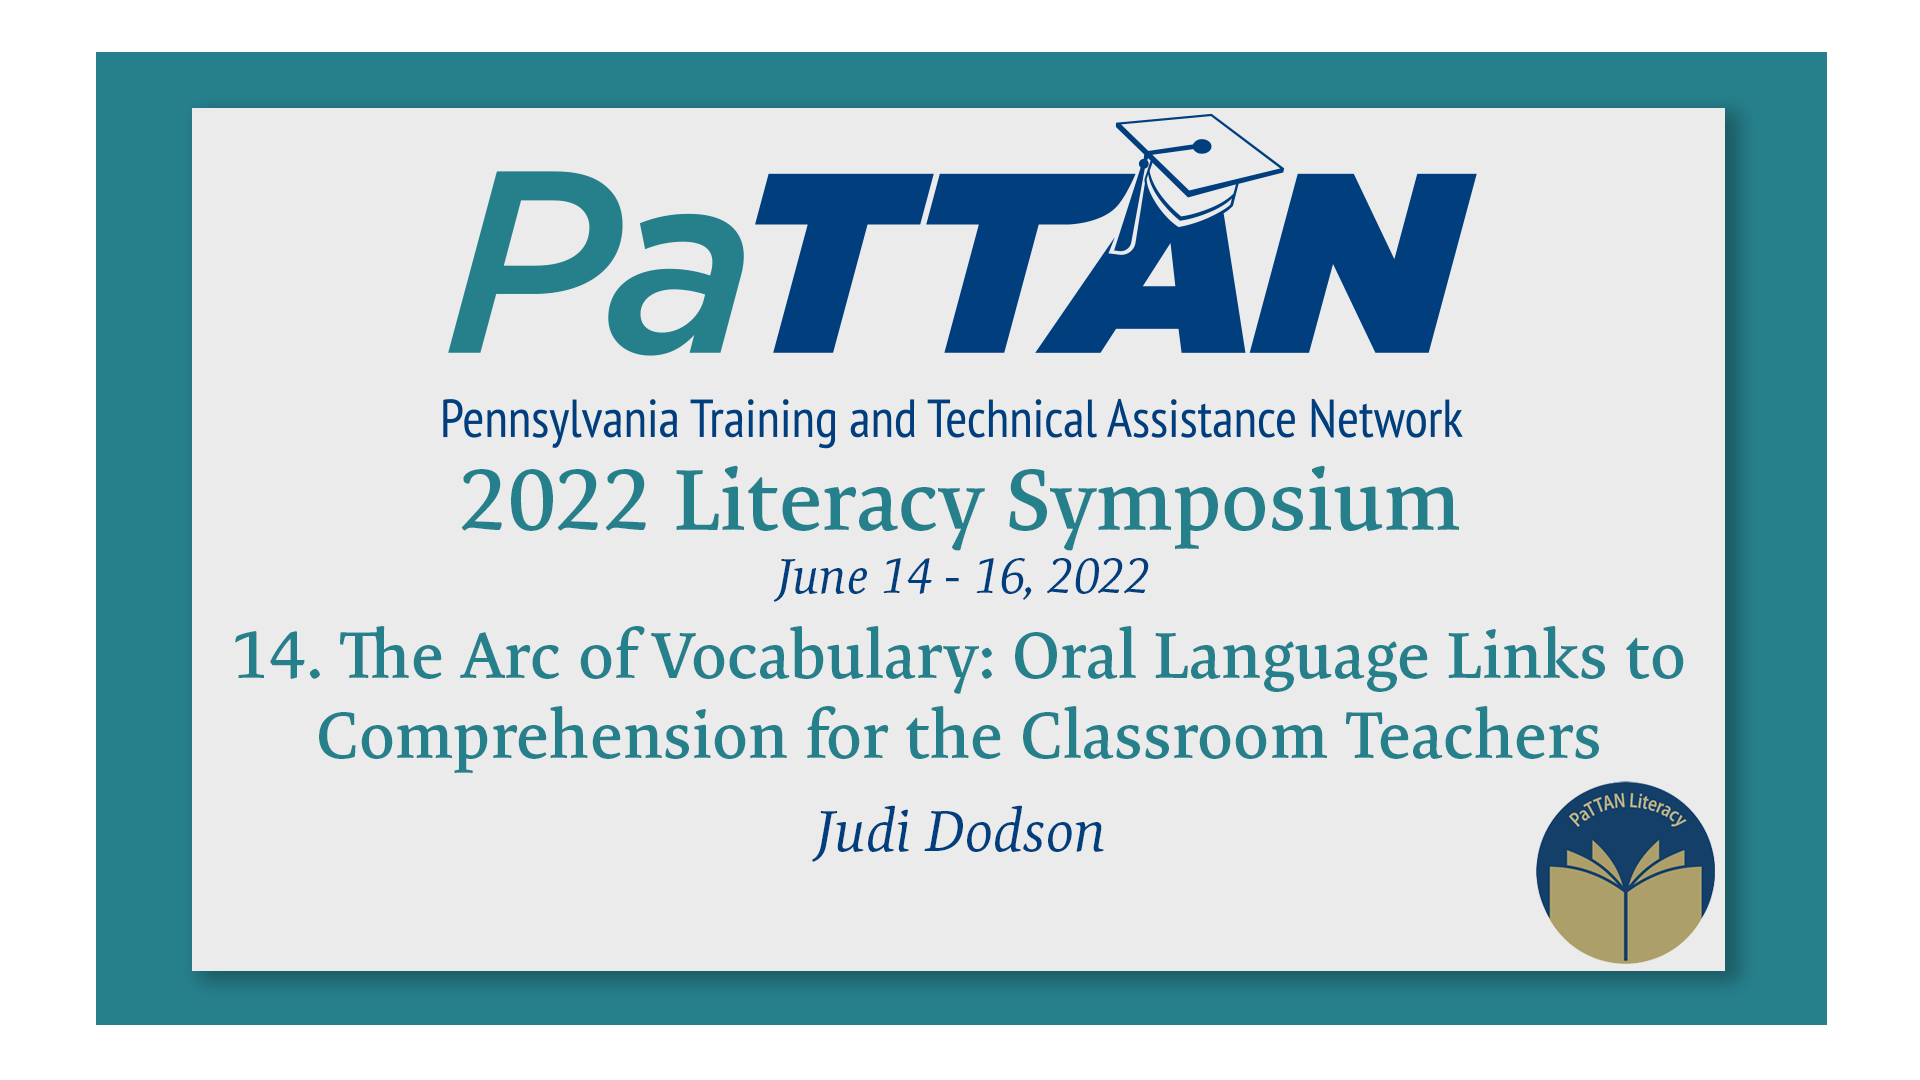 14. The Arc of Vocabulary: Oral Language Links to Comprehension for ... | 2022 Literacy Symposium